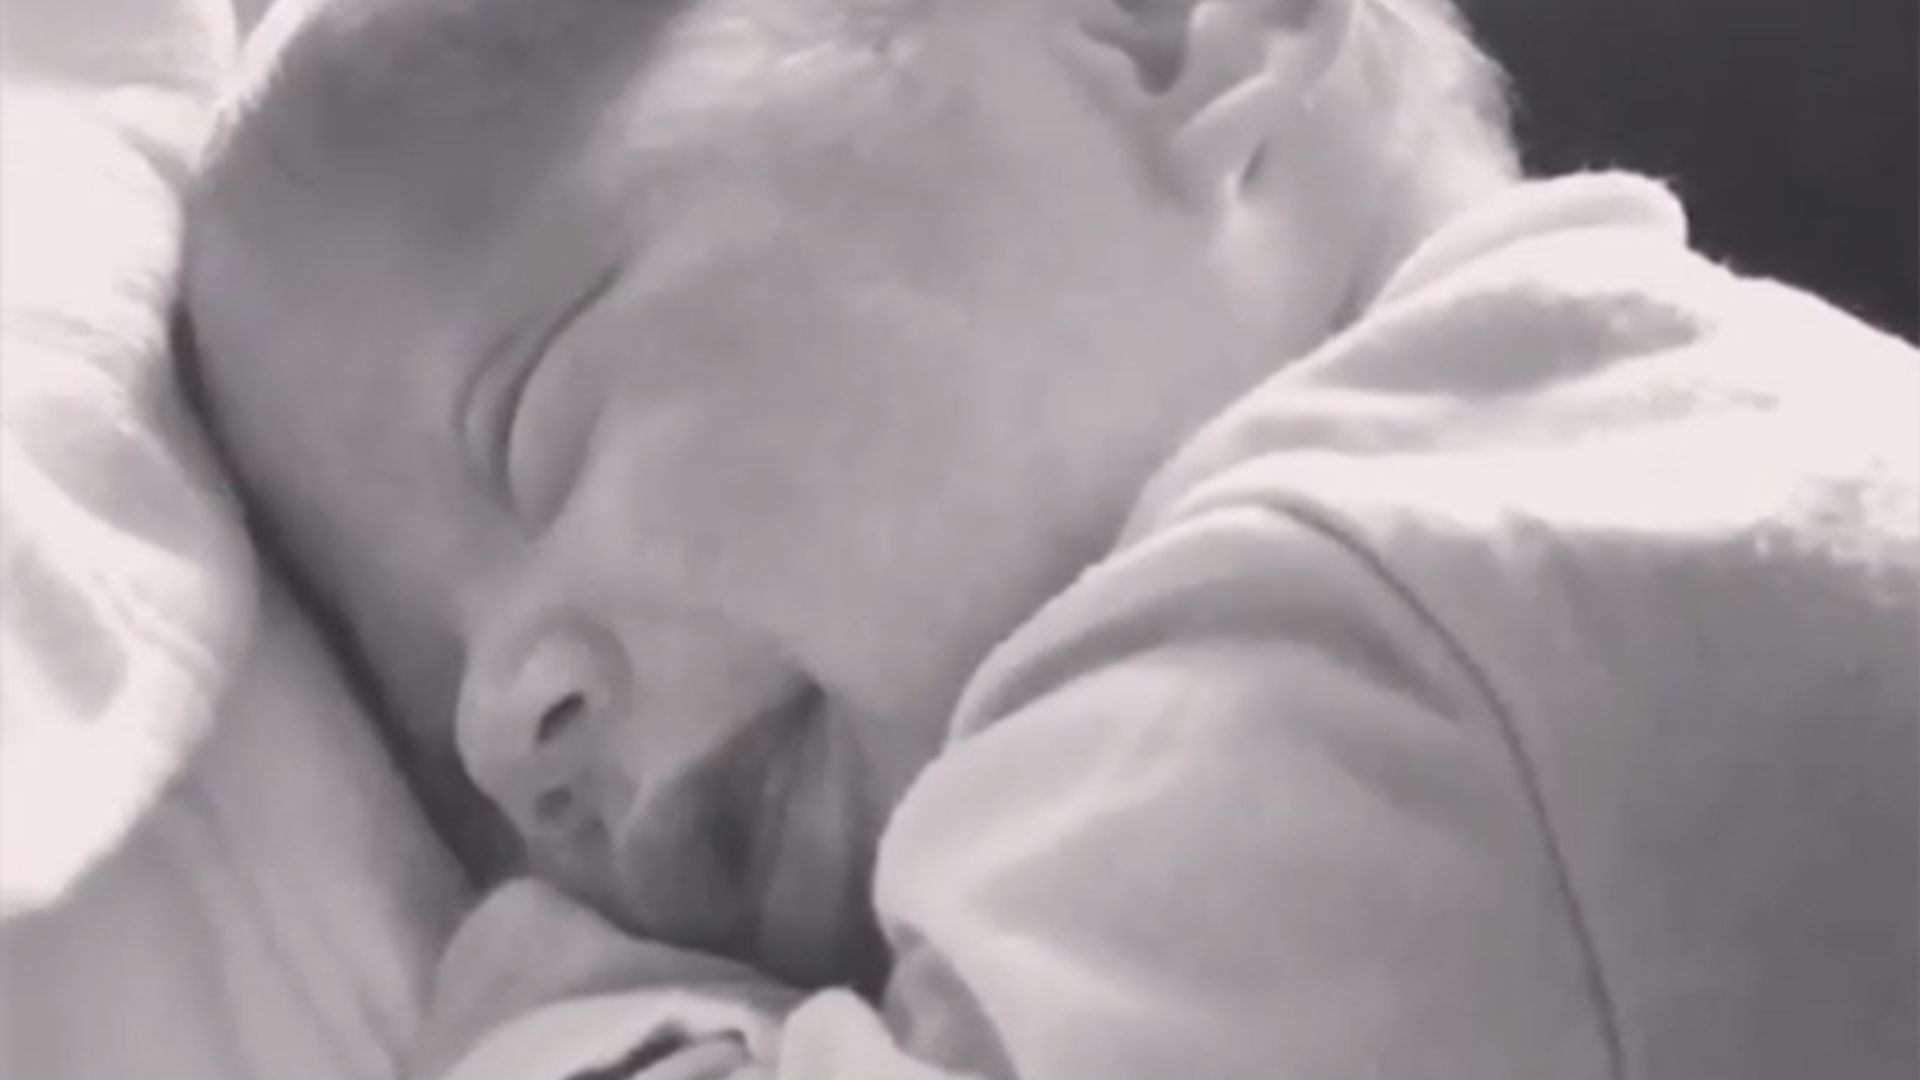 Vanessa Lachey's baby smiling when she kisses his head will melt your heart: watch